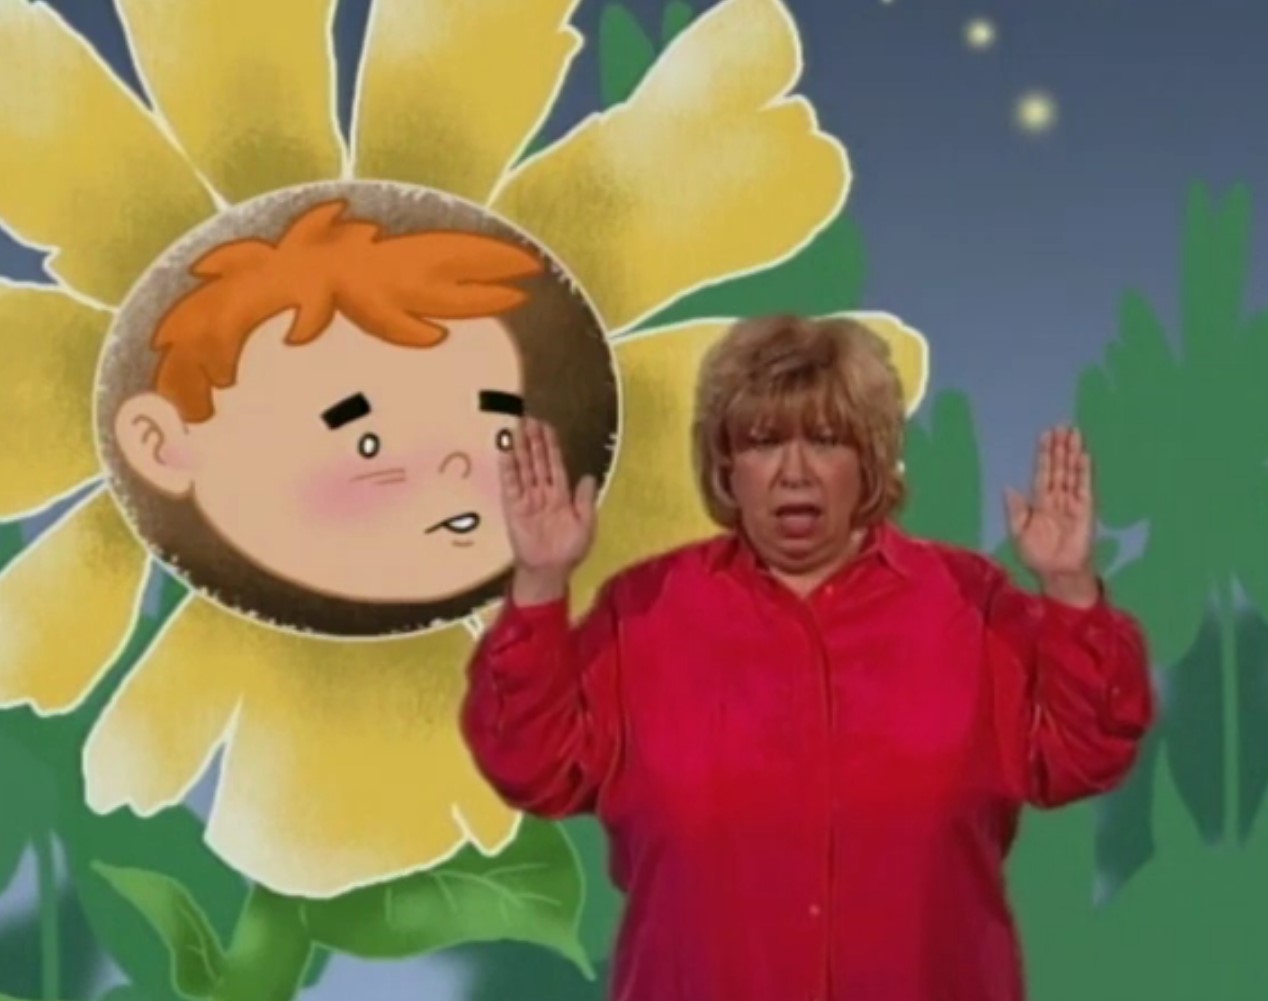 woman signing in front of a cartoon of a flower with a boy's face in the middle